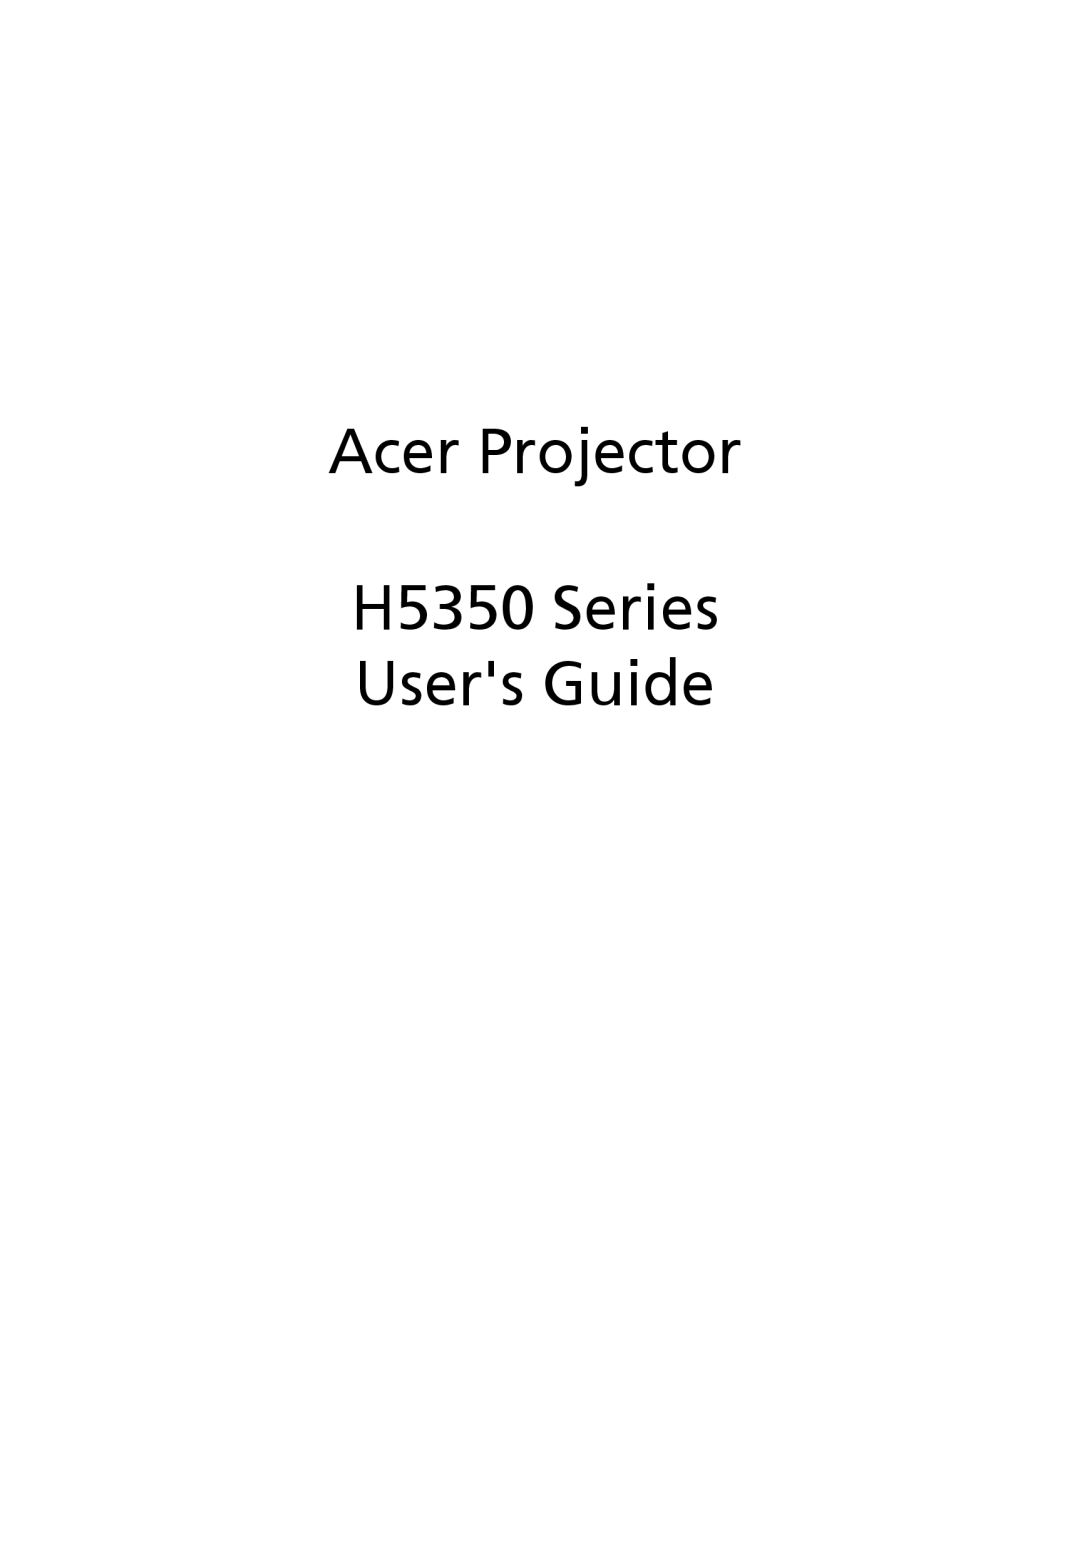 Acer manual Acer Projector, H5350 Series Users Guide 